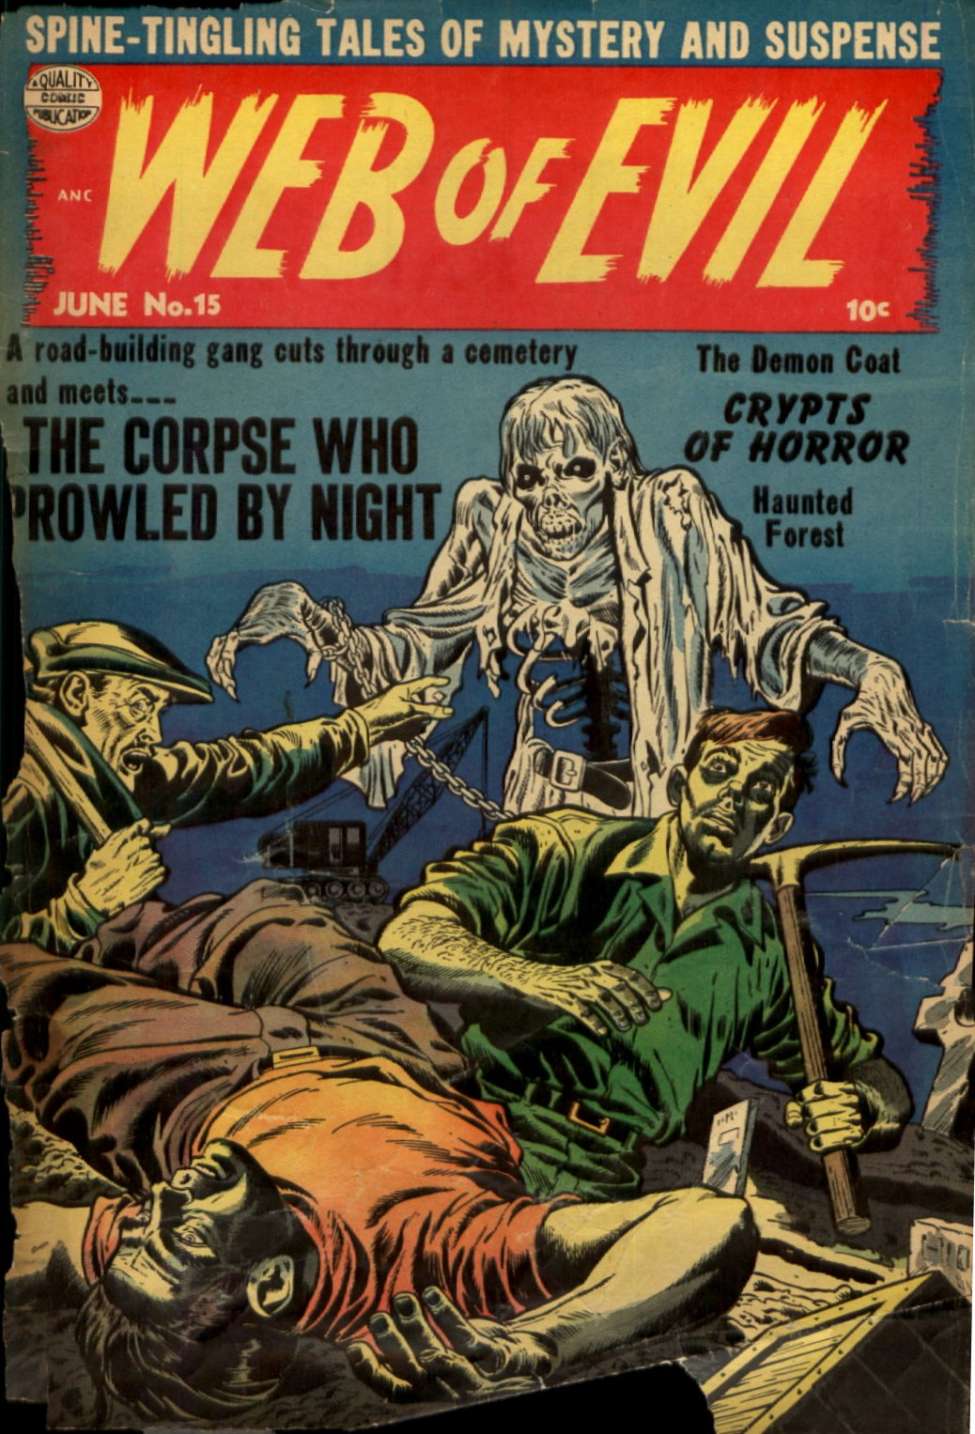 Comic Book Cover For Web of Evil 15